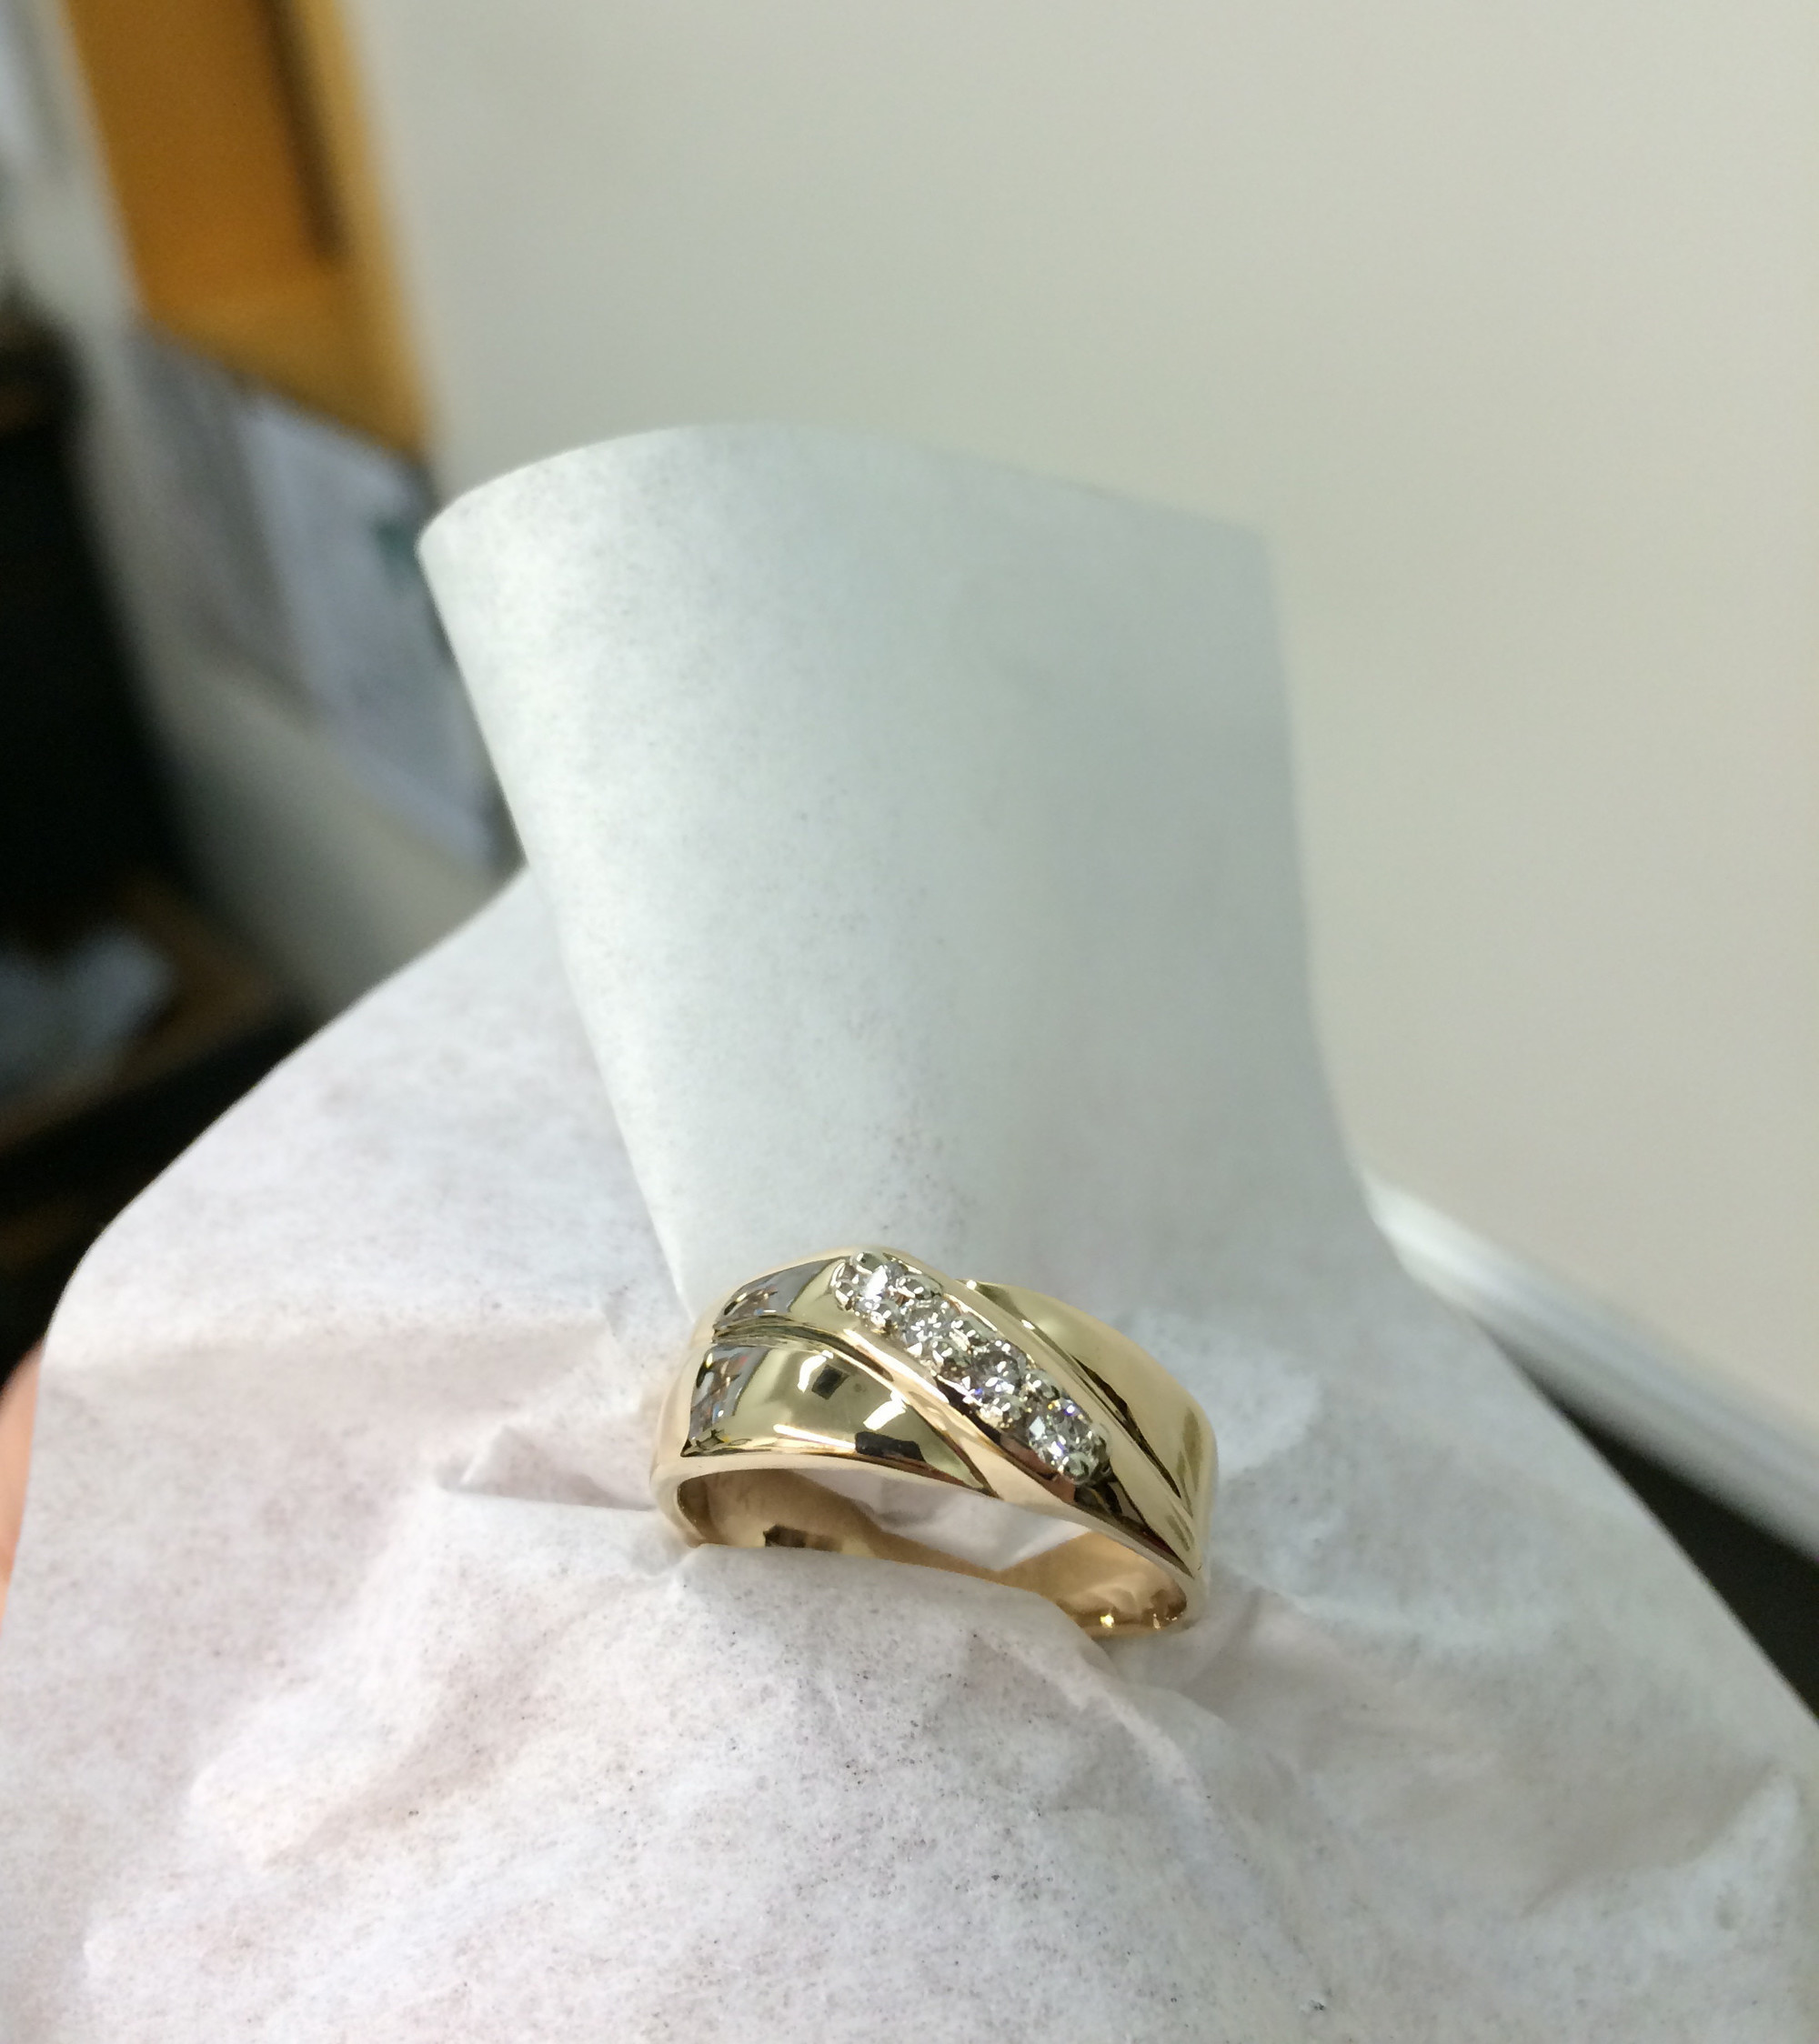 The owner of the ring was certainly pleased to have it back, and in even finer condition than before.